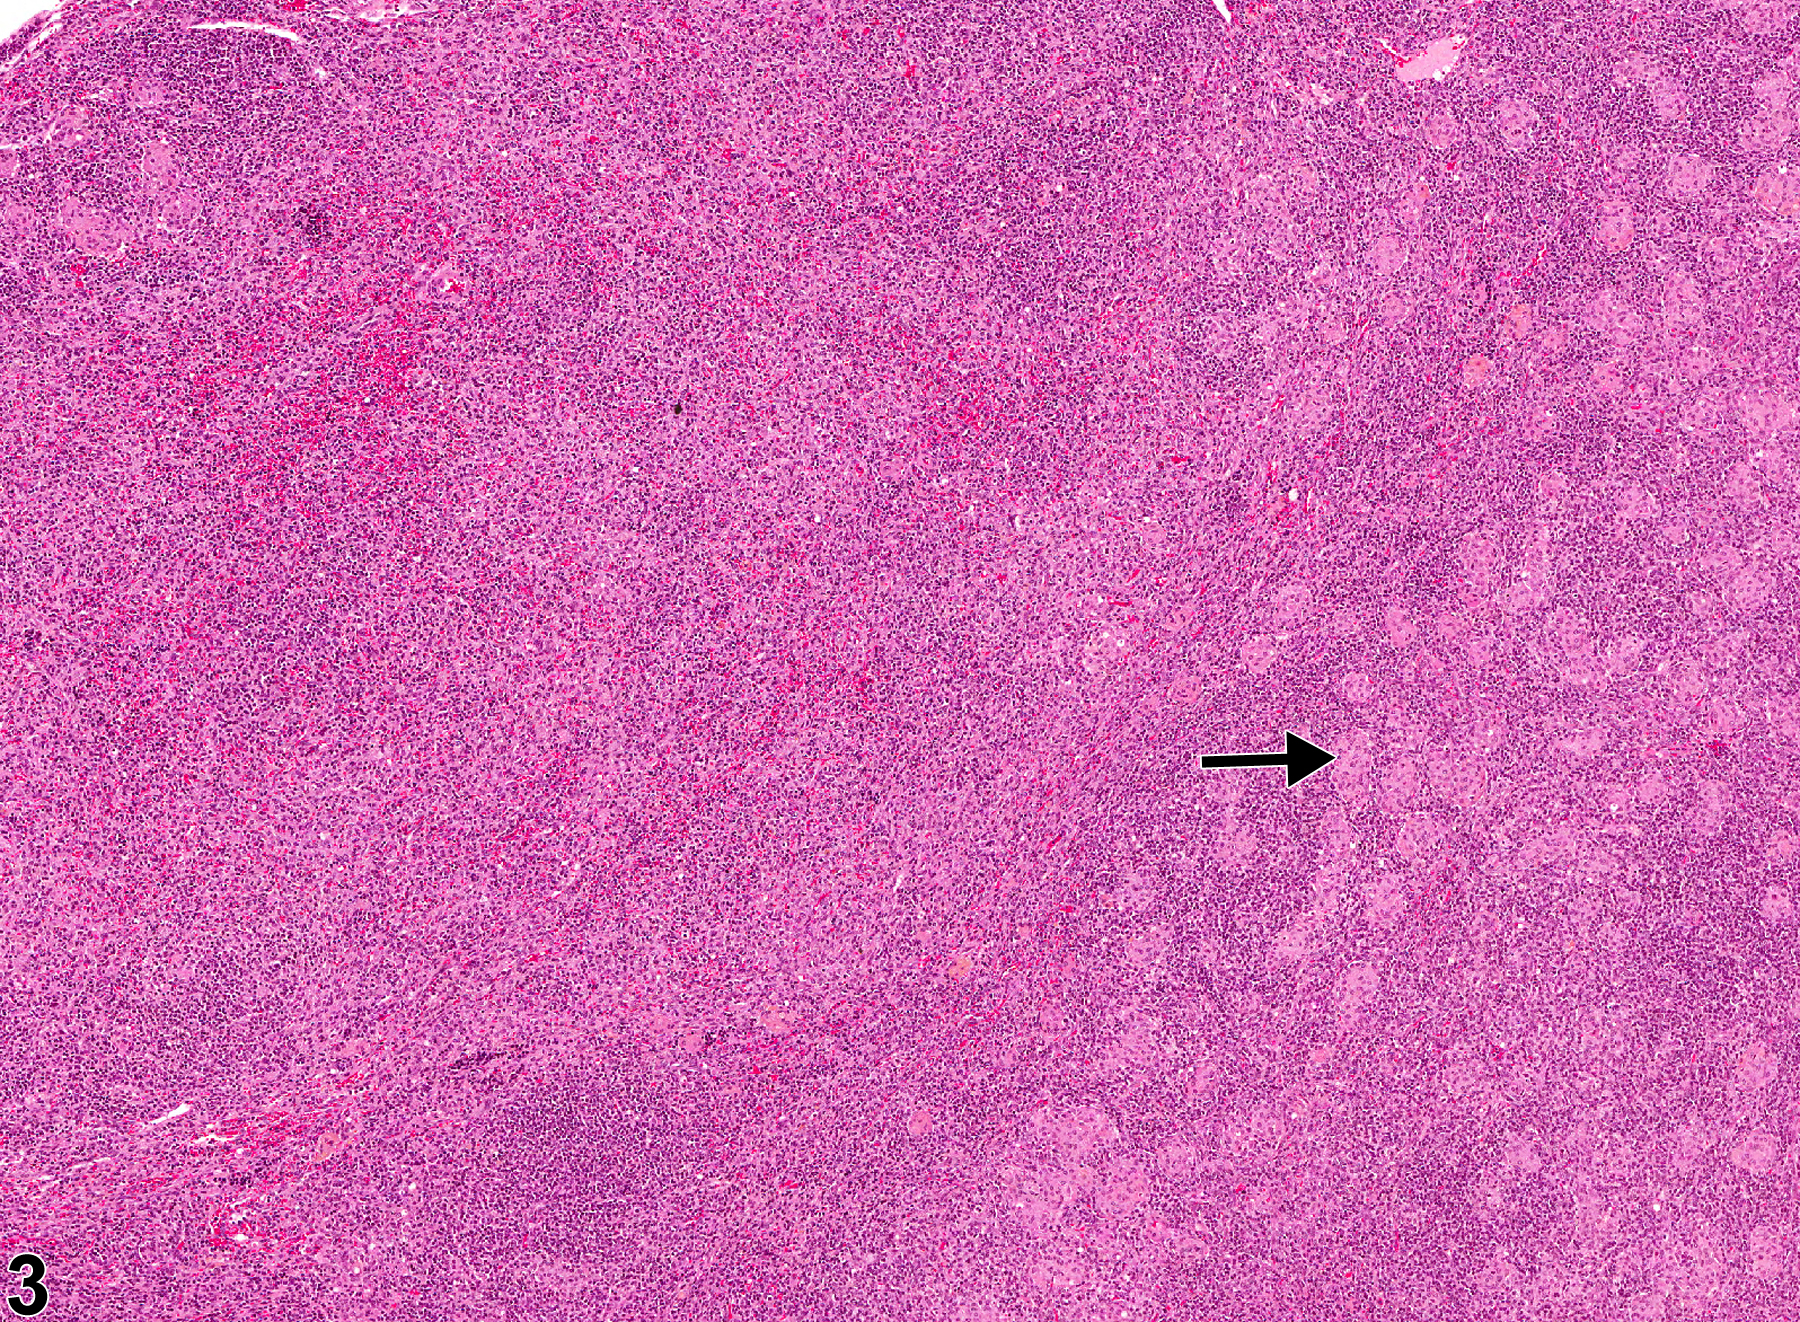 Image of inflammation in the lymph node from a female F344/N rat in a chronic study